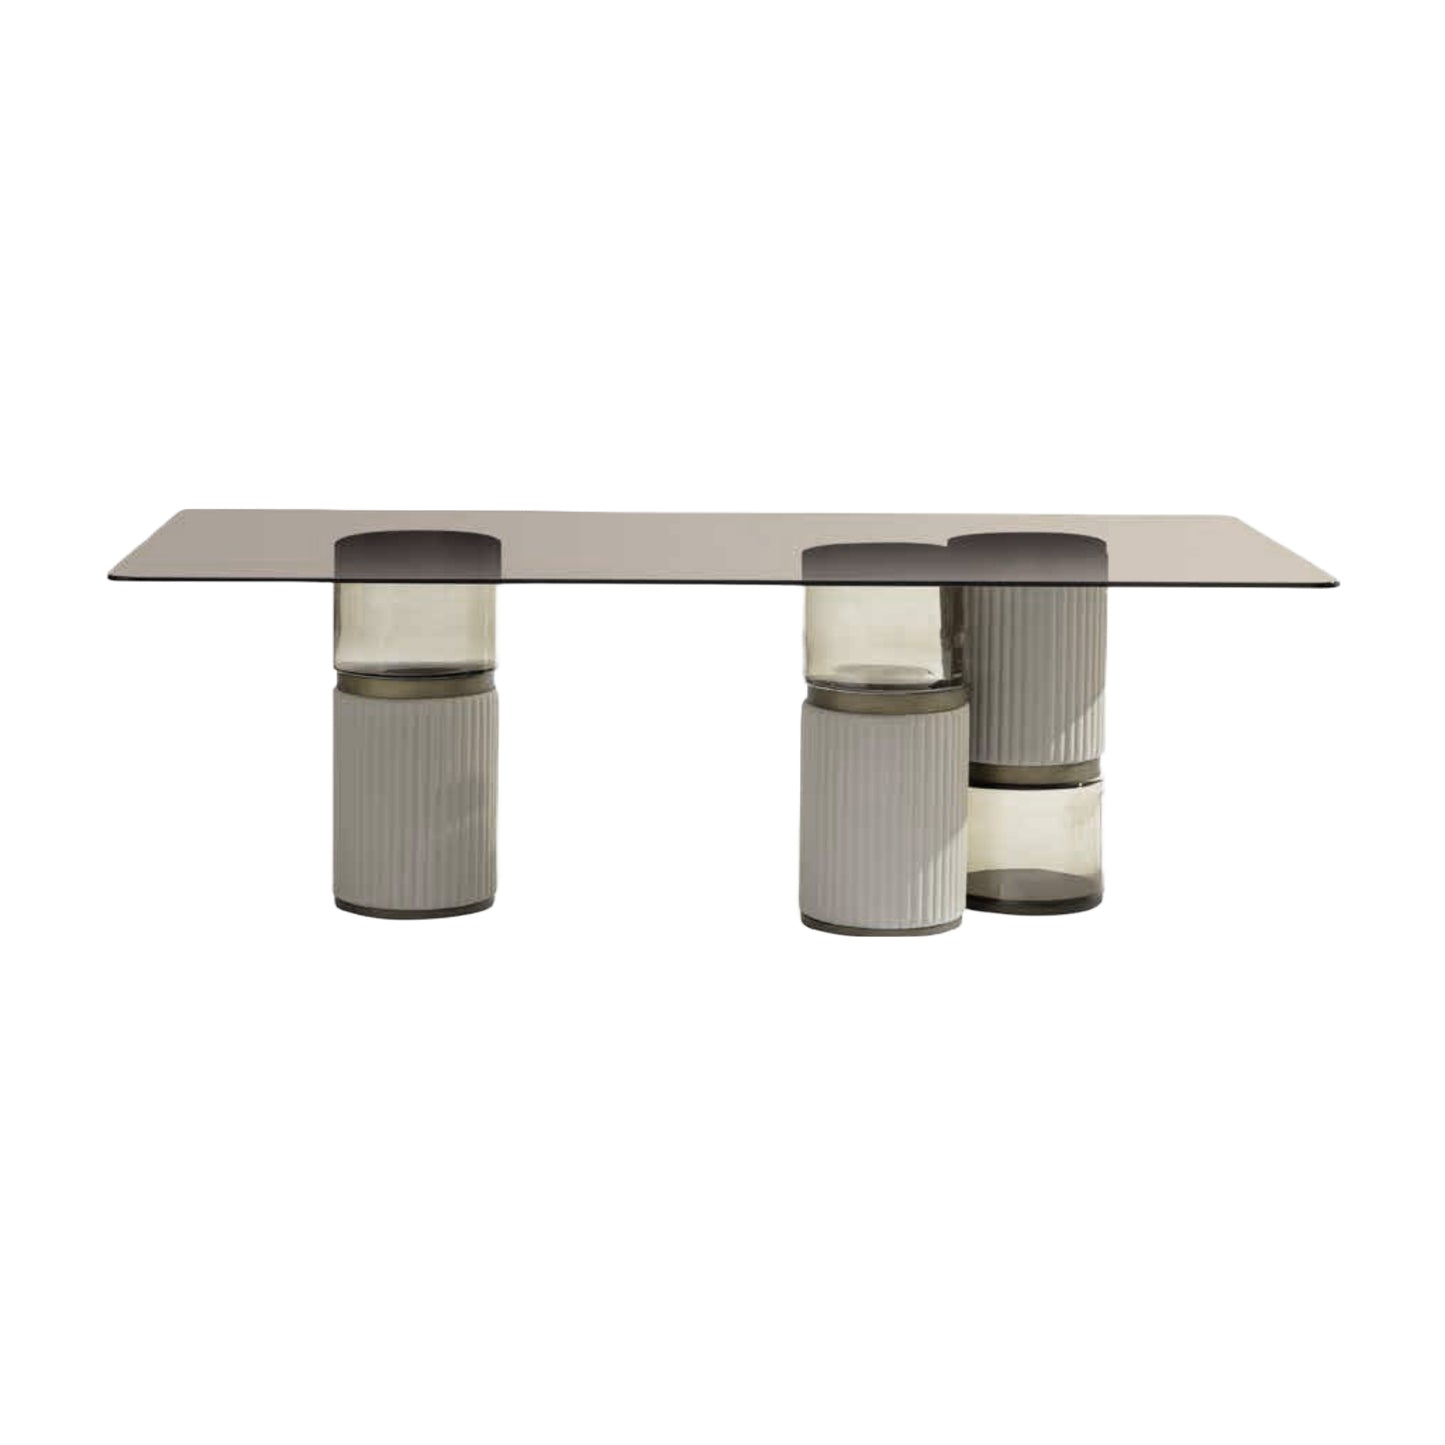 CARPANESE | Imperial S Dining Table - $28,900.00